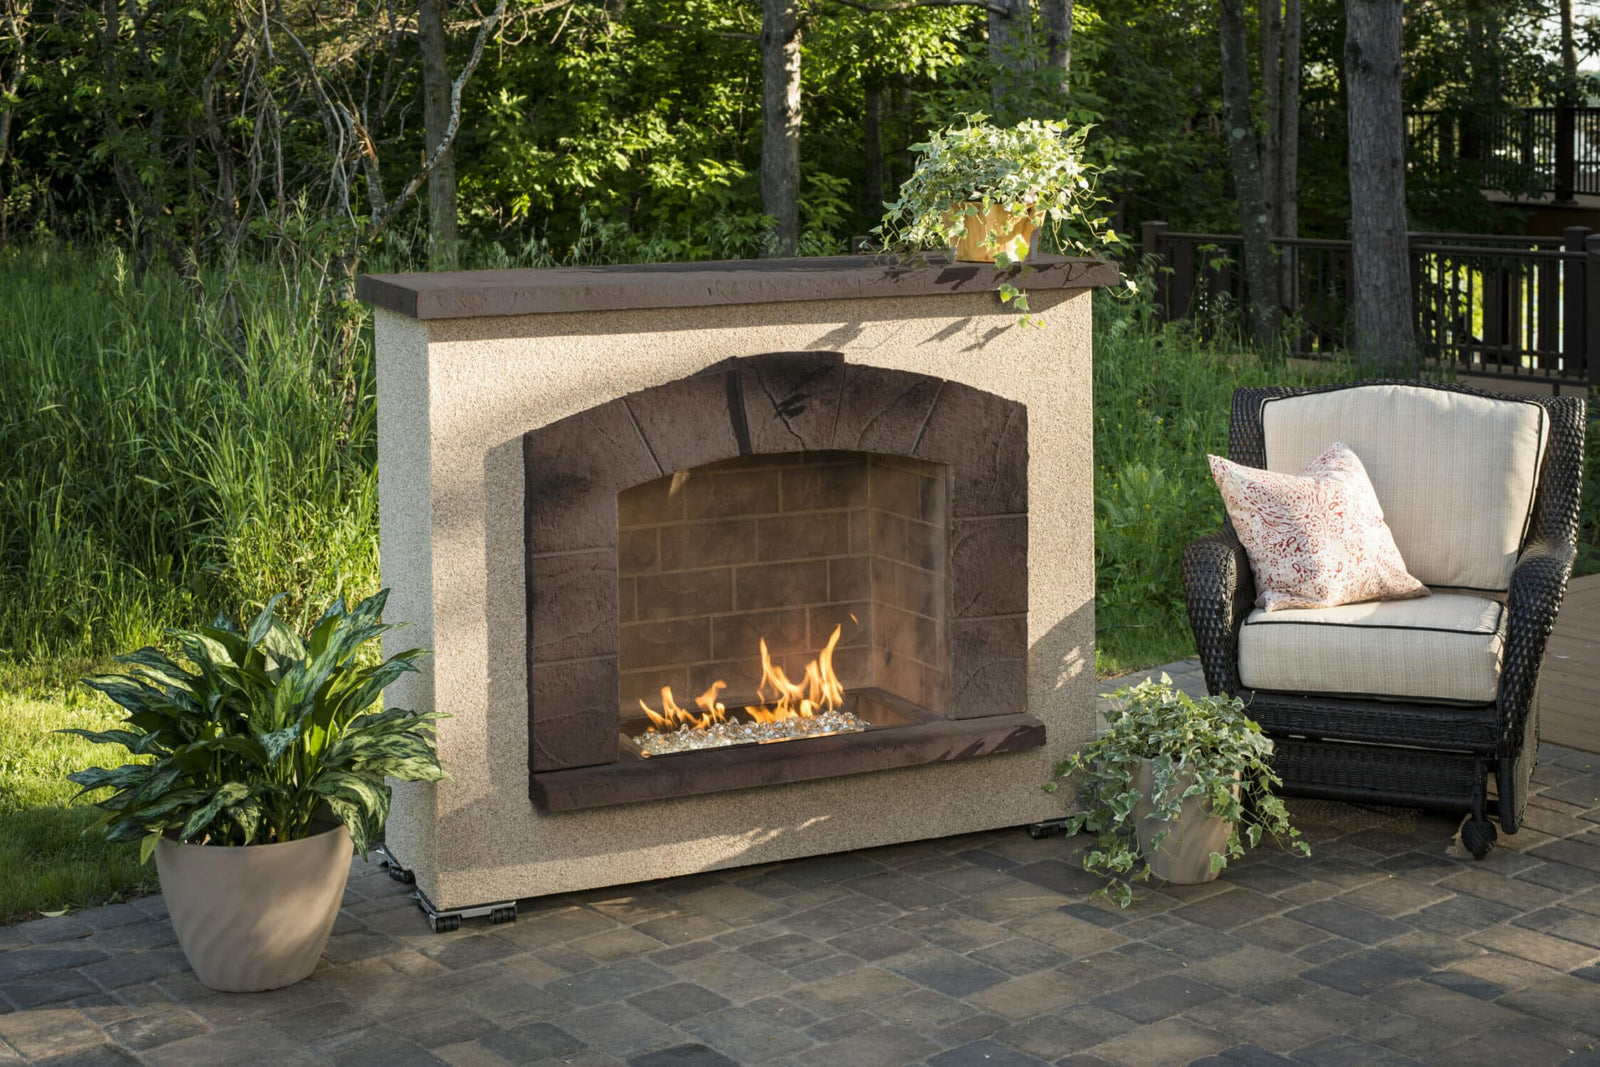 Gas Fireplaces: The Focal Point of Your Outdoor Living Room